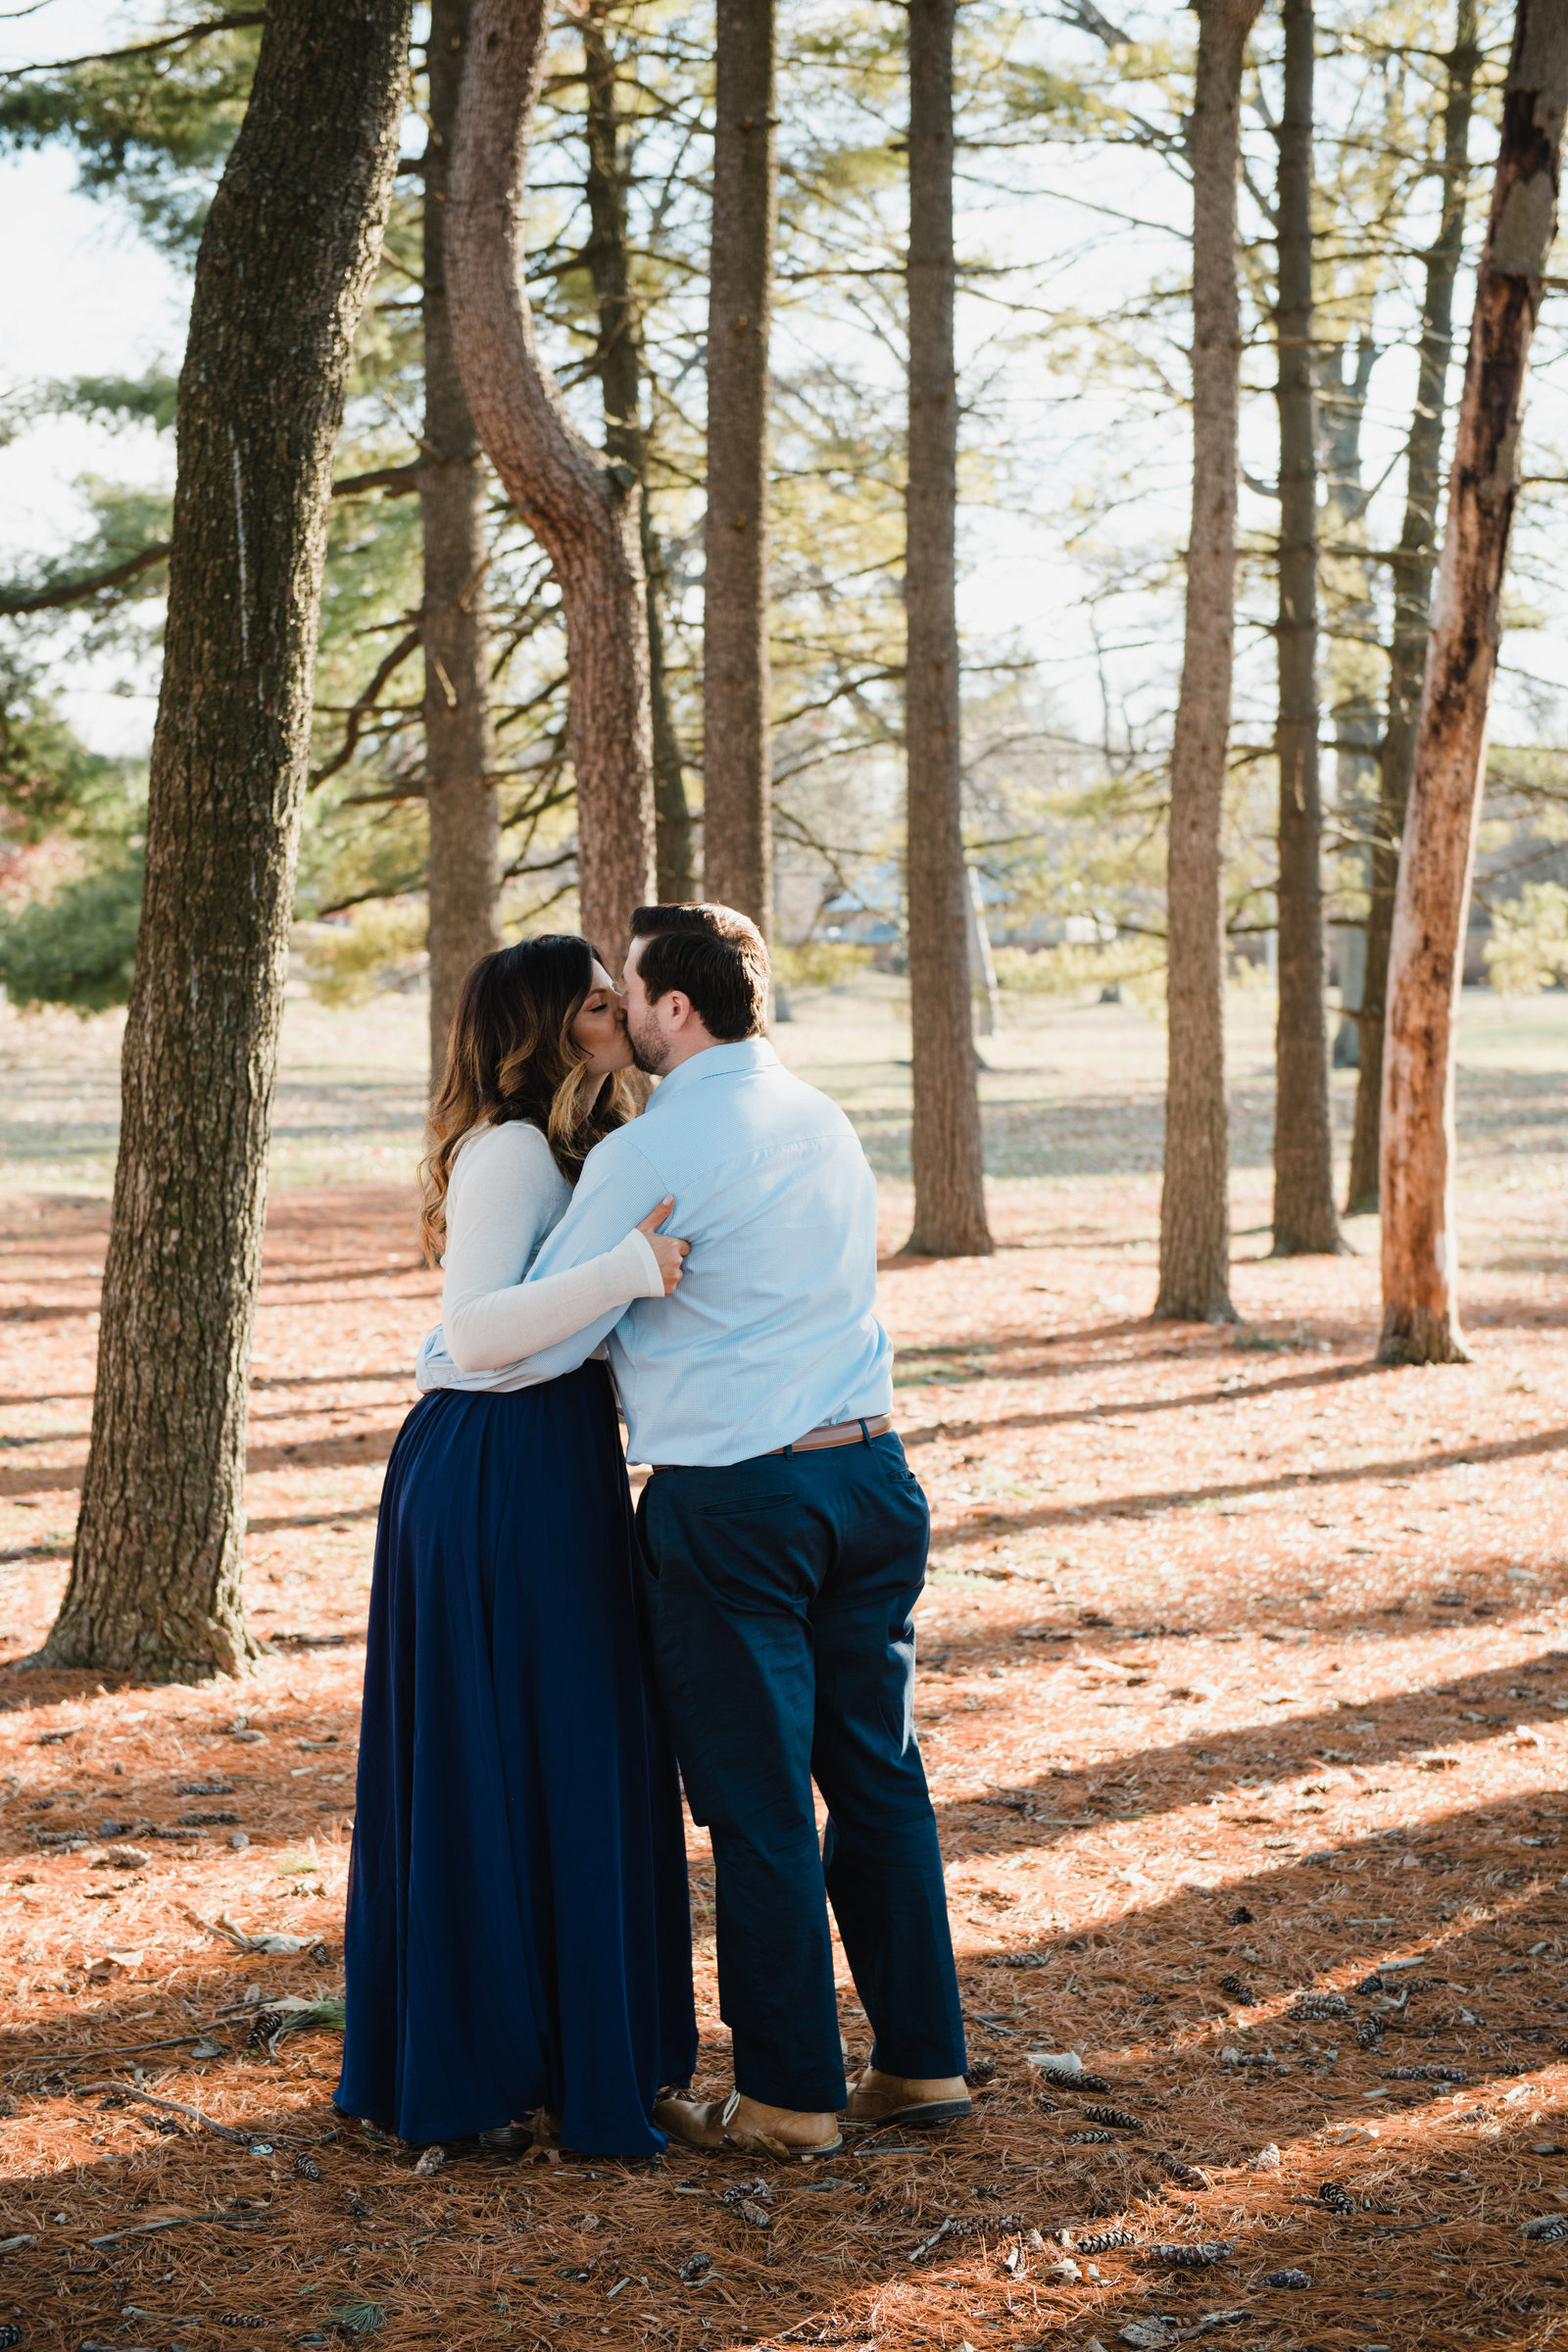 outdoor engagement photos in the trees